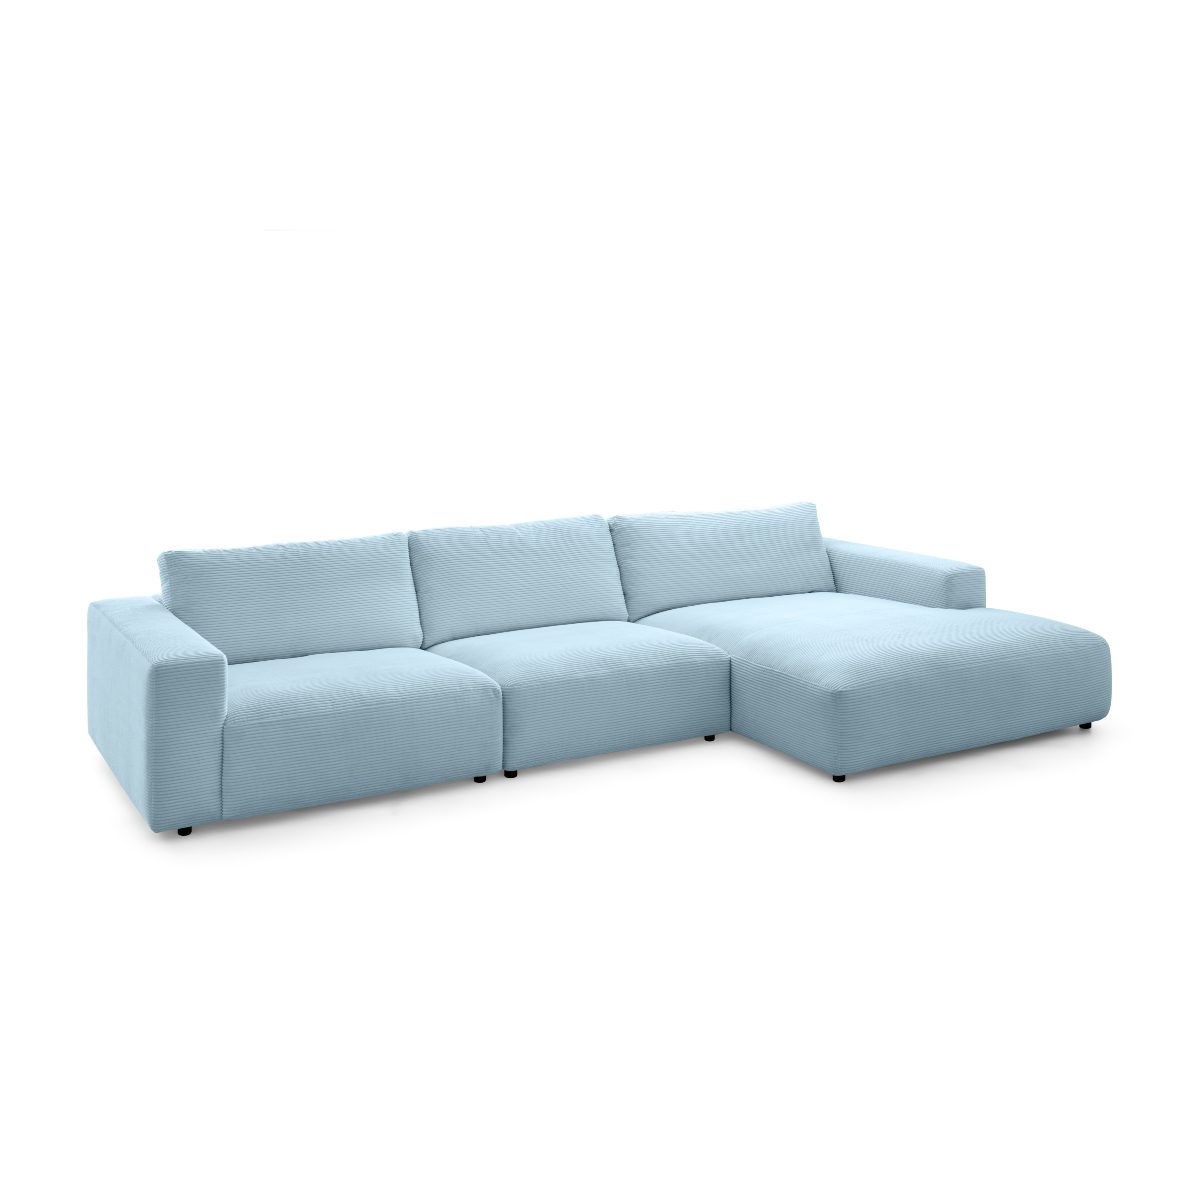 Lucia 3,5 Gallery Sitzer M branded by Sofa Musterring Cord